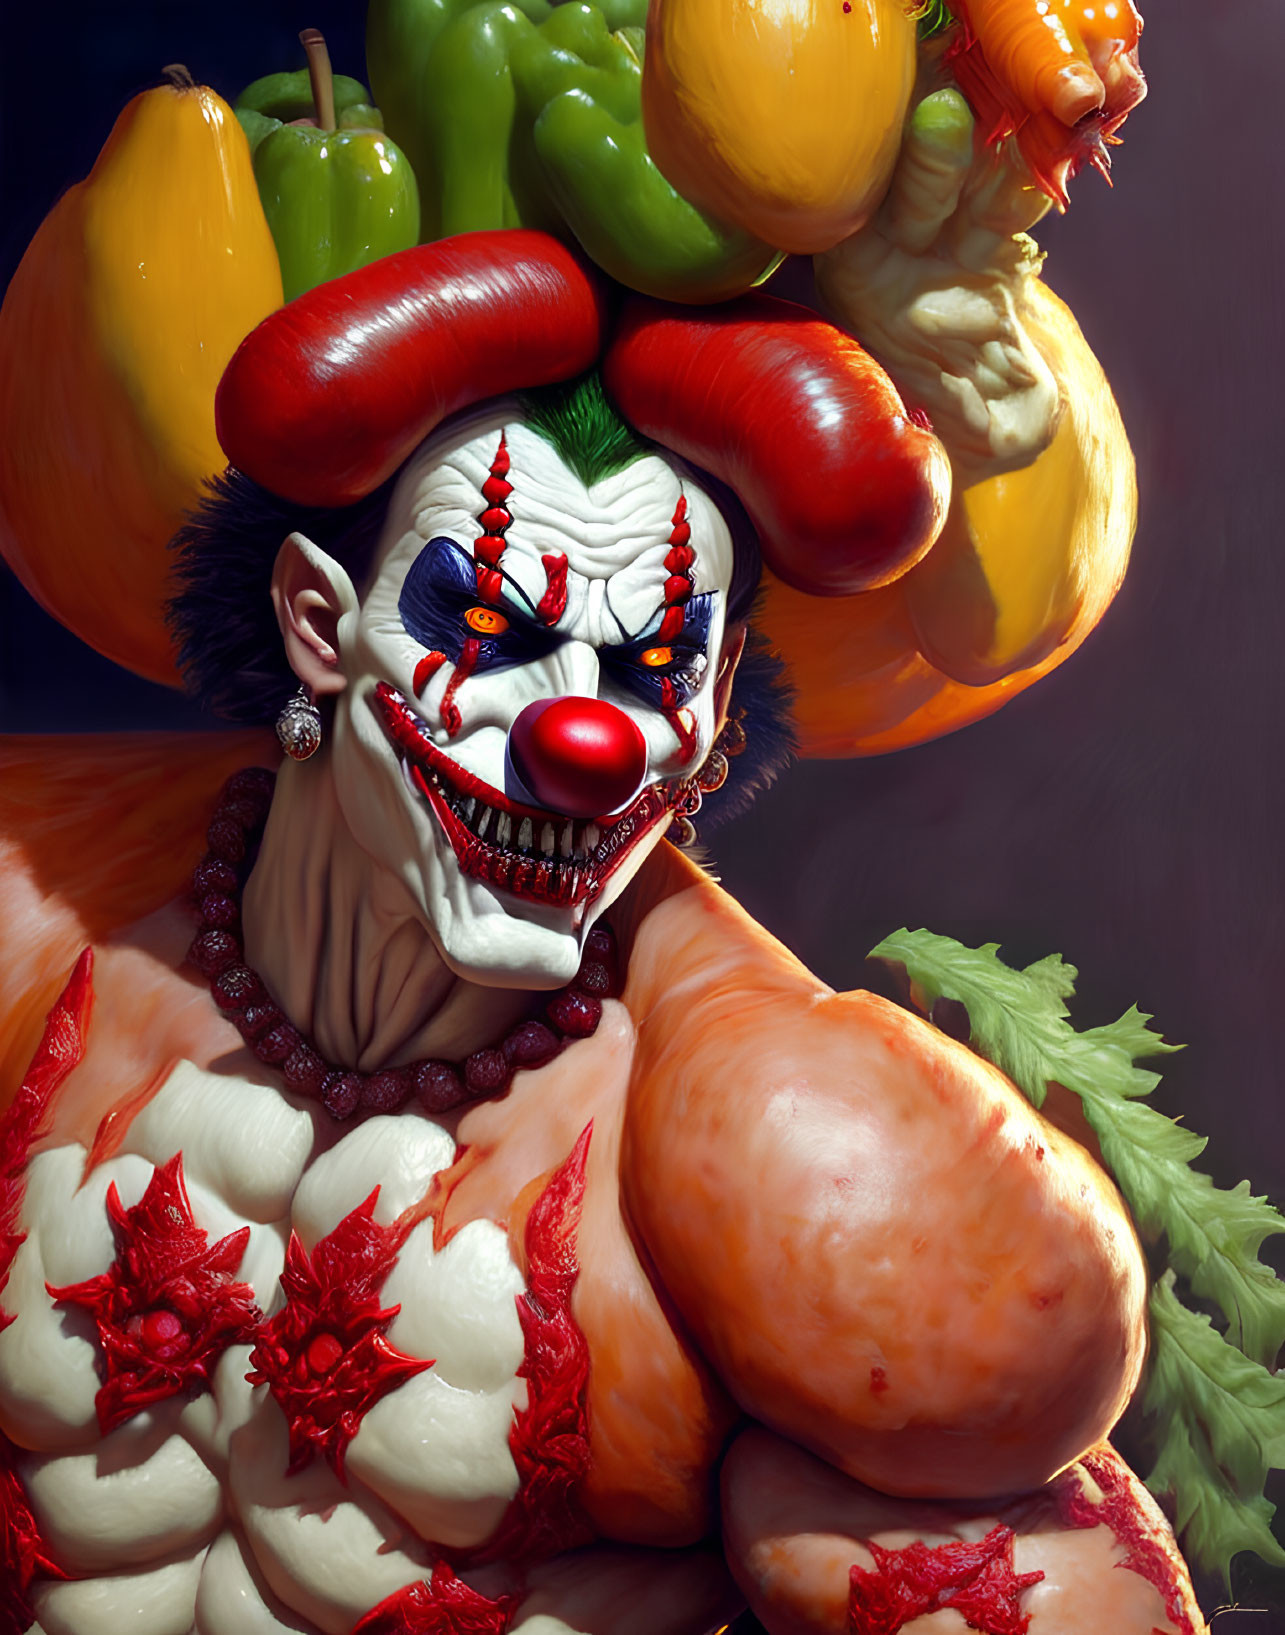 Vibrant clown portrait with exaggerated features and bell peppers